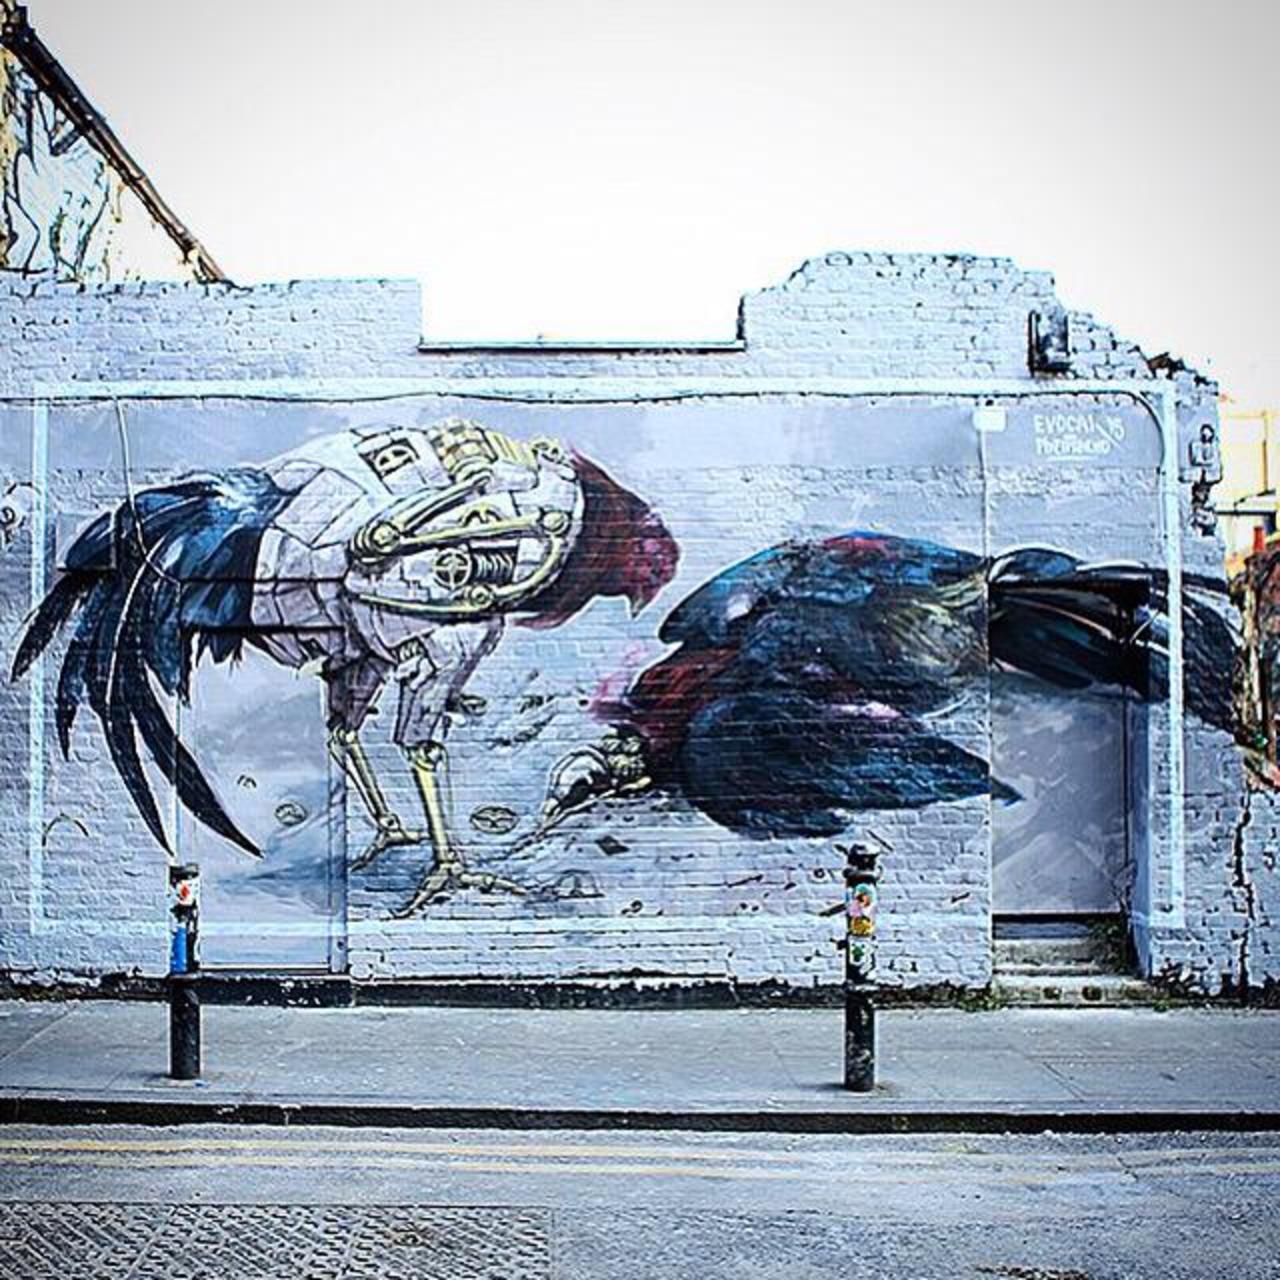 Amazing #collab #mural by friends and #artists @pixel_pancho and @Evoca1 in #London #streetart #urbanart #graffiti http://t.co/qRChEmM62K